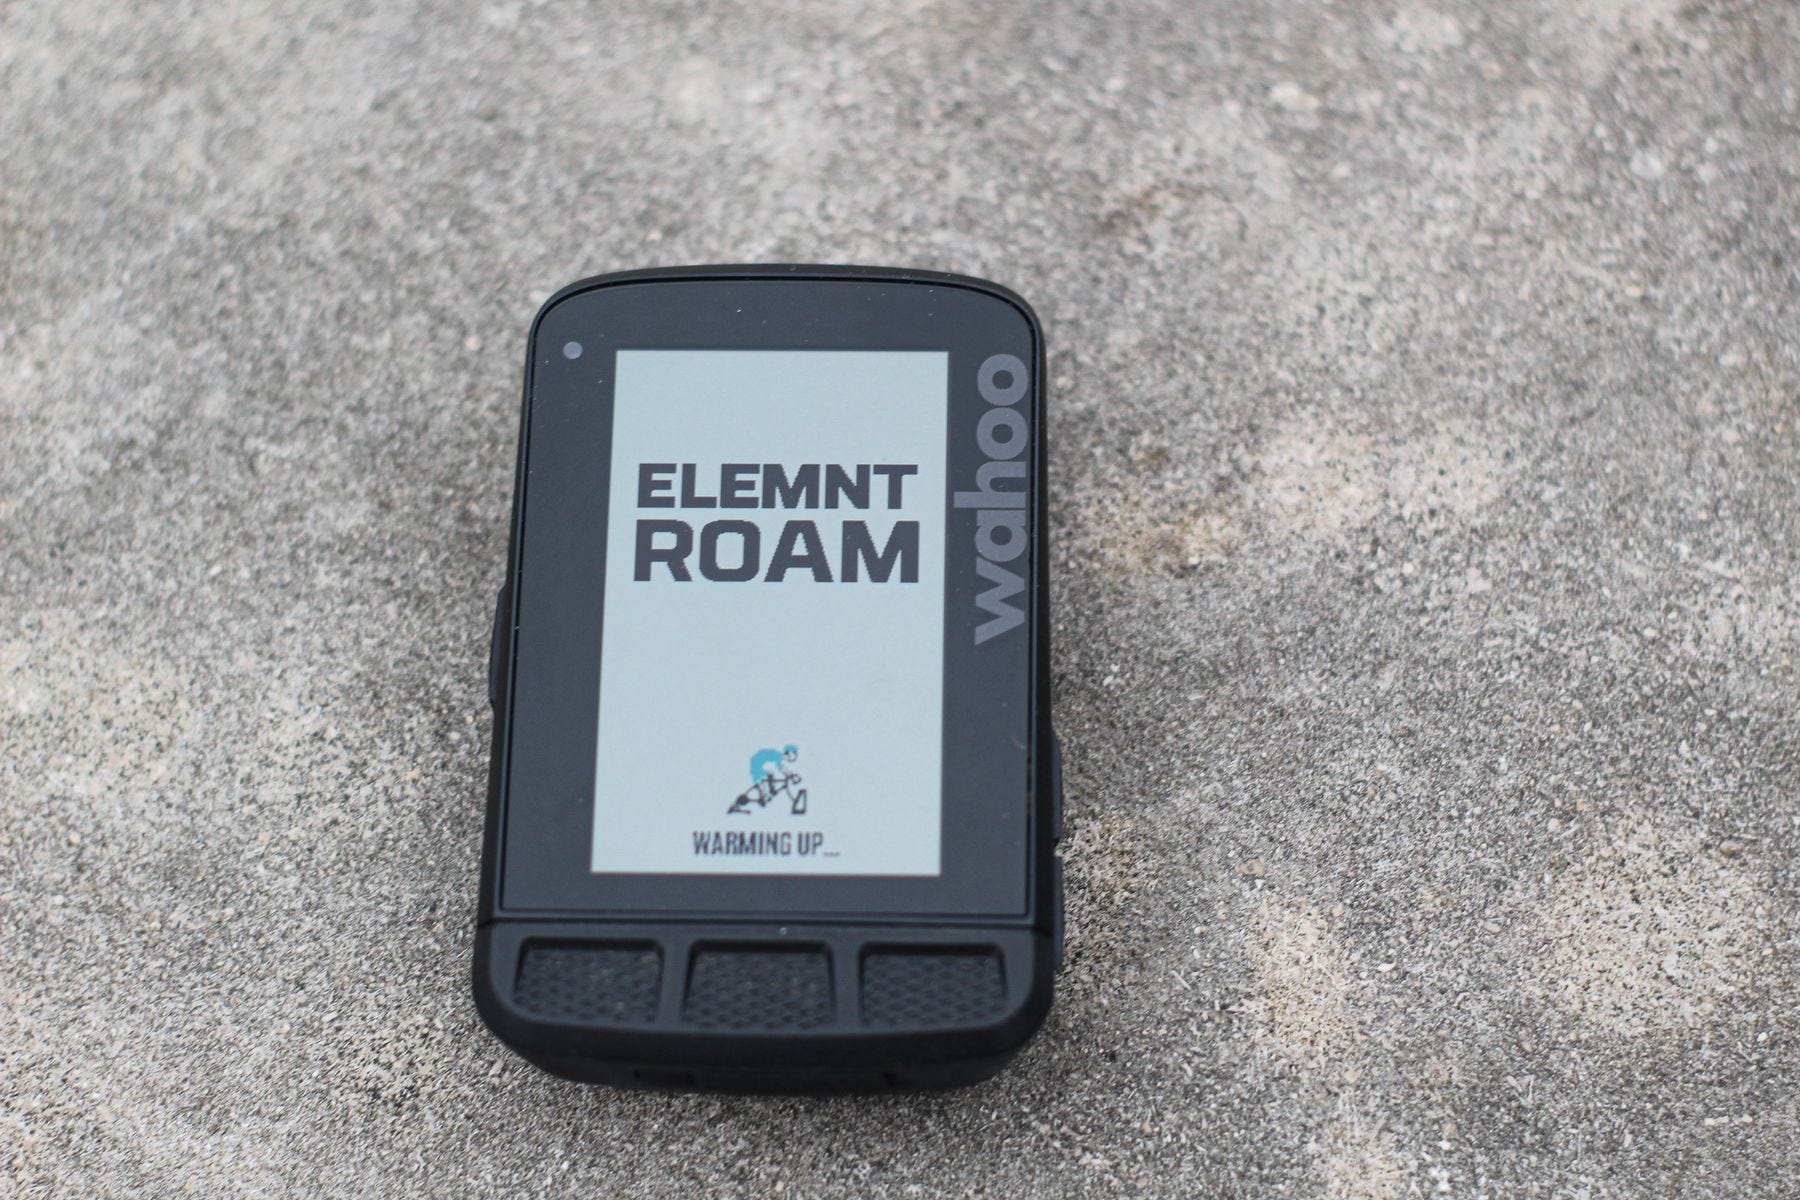 Wahoo ELEMNT BOLT V2 In-Depth Review – Now with a new color